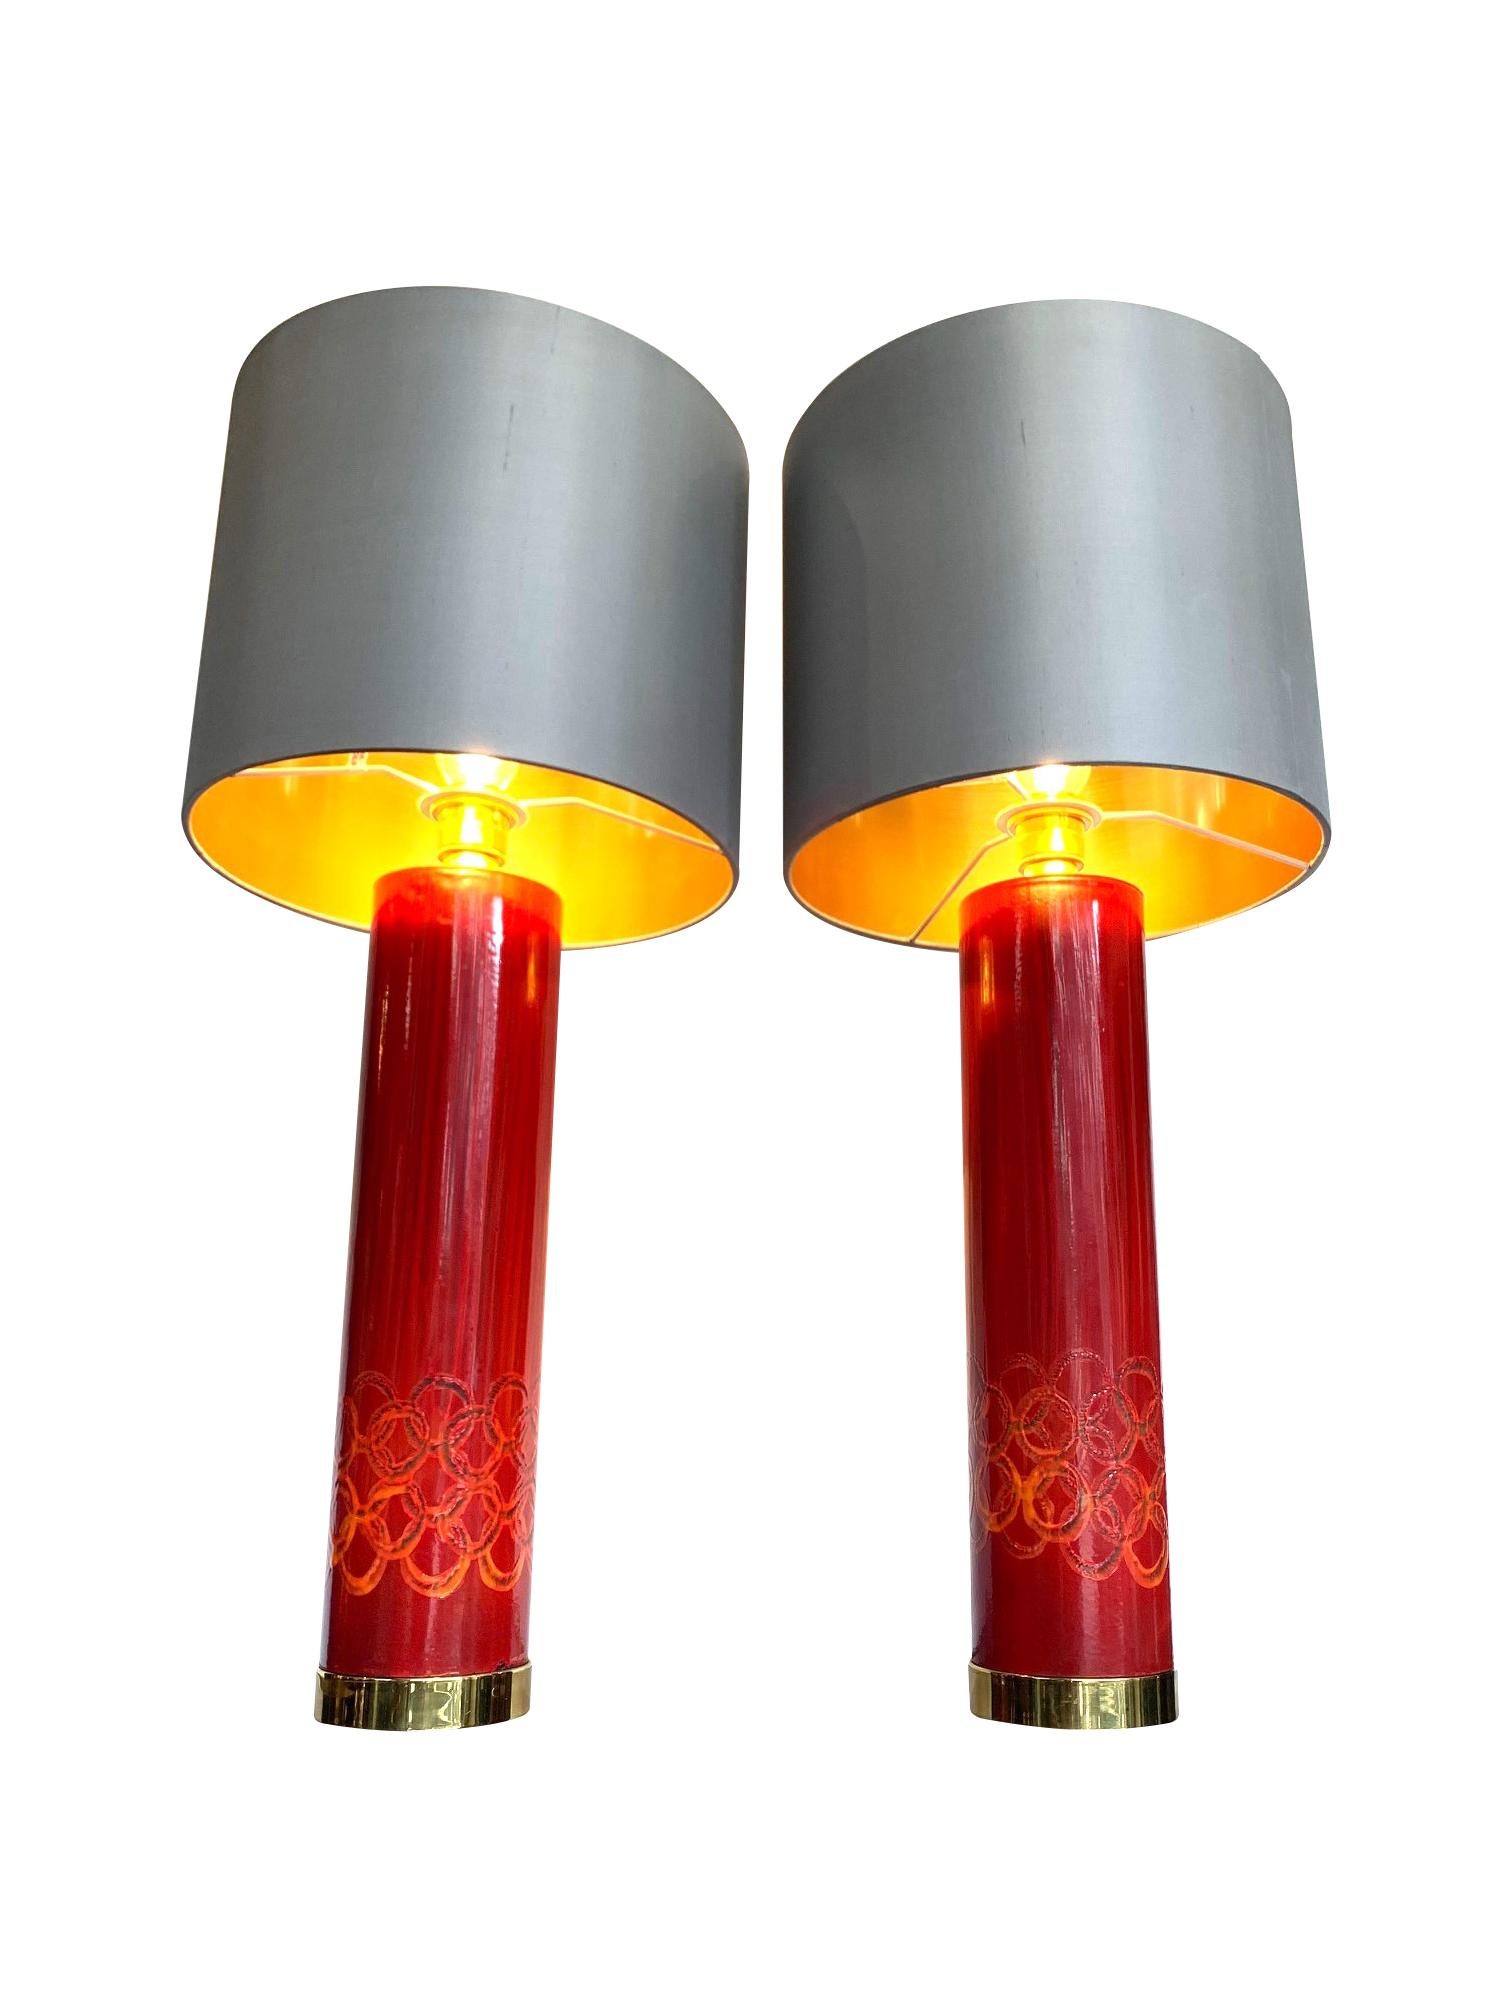 A lovely pair of Swedish red ceramic lamps each with circular orange ceramic detail on the bottom of the base. With brass fittings and top plates, mounted on brass bases. Re wired with new fittings, antique gold cord flex and PAT tested. Both with